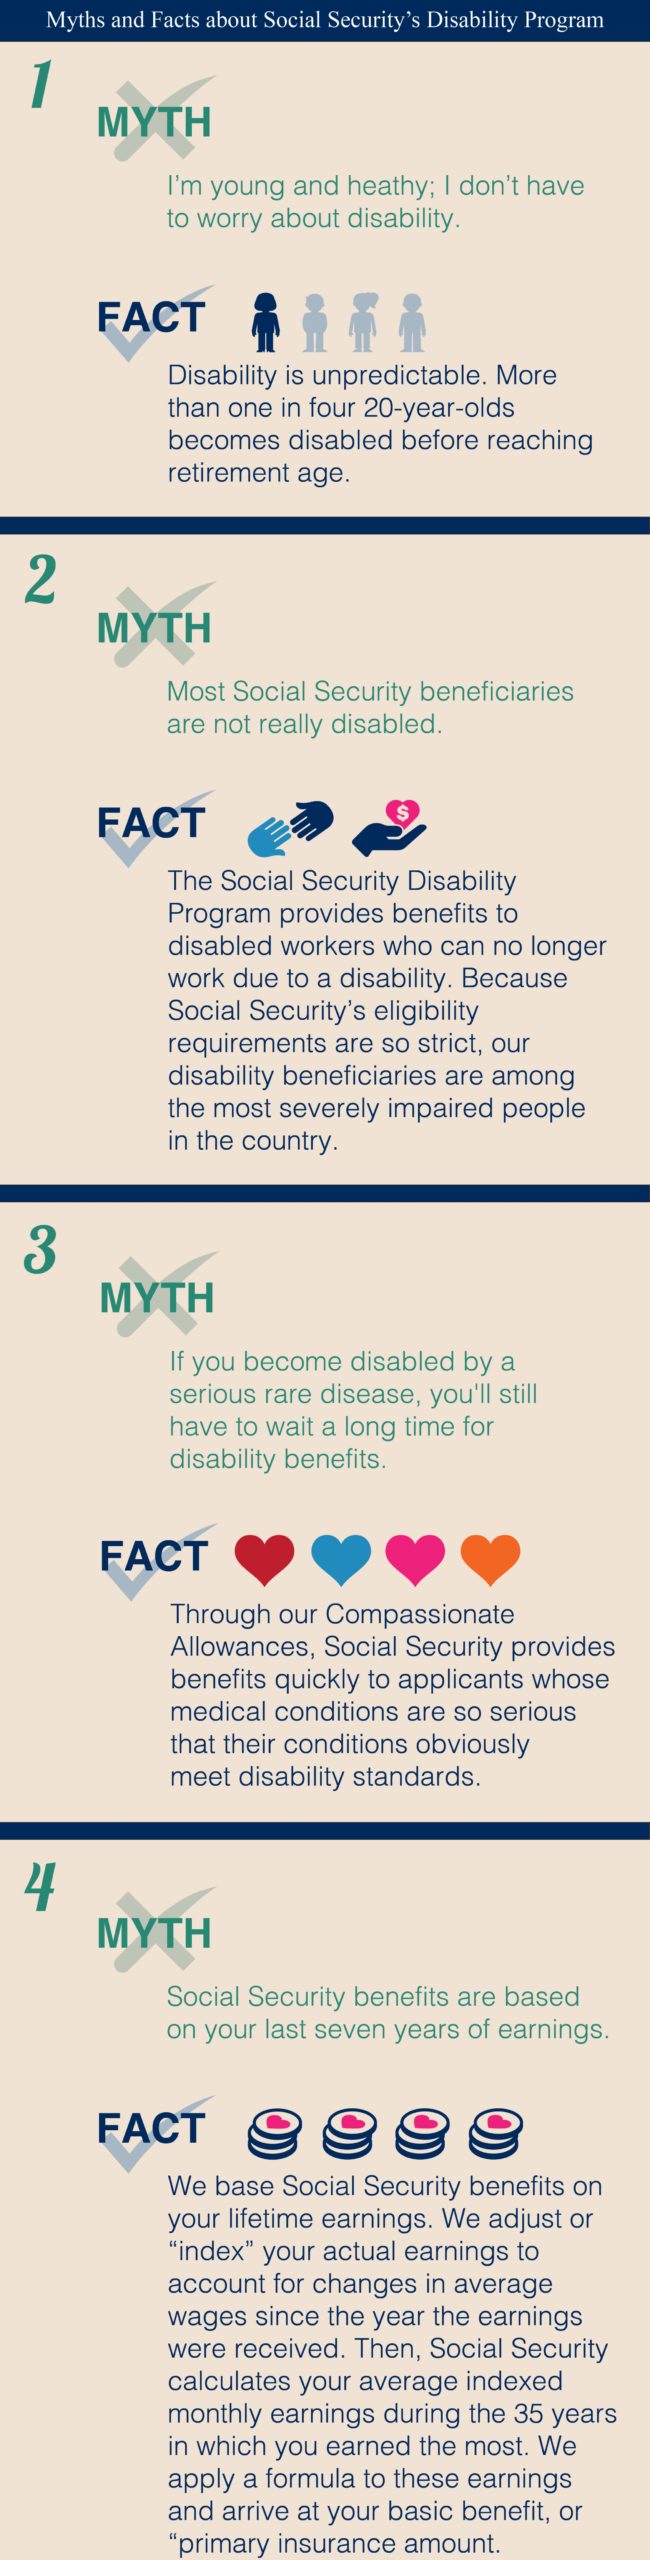 Social Security Facts and Myths - Government Executive